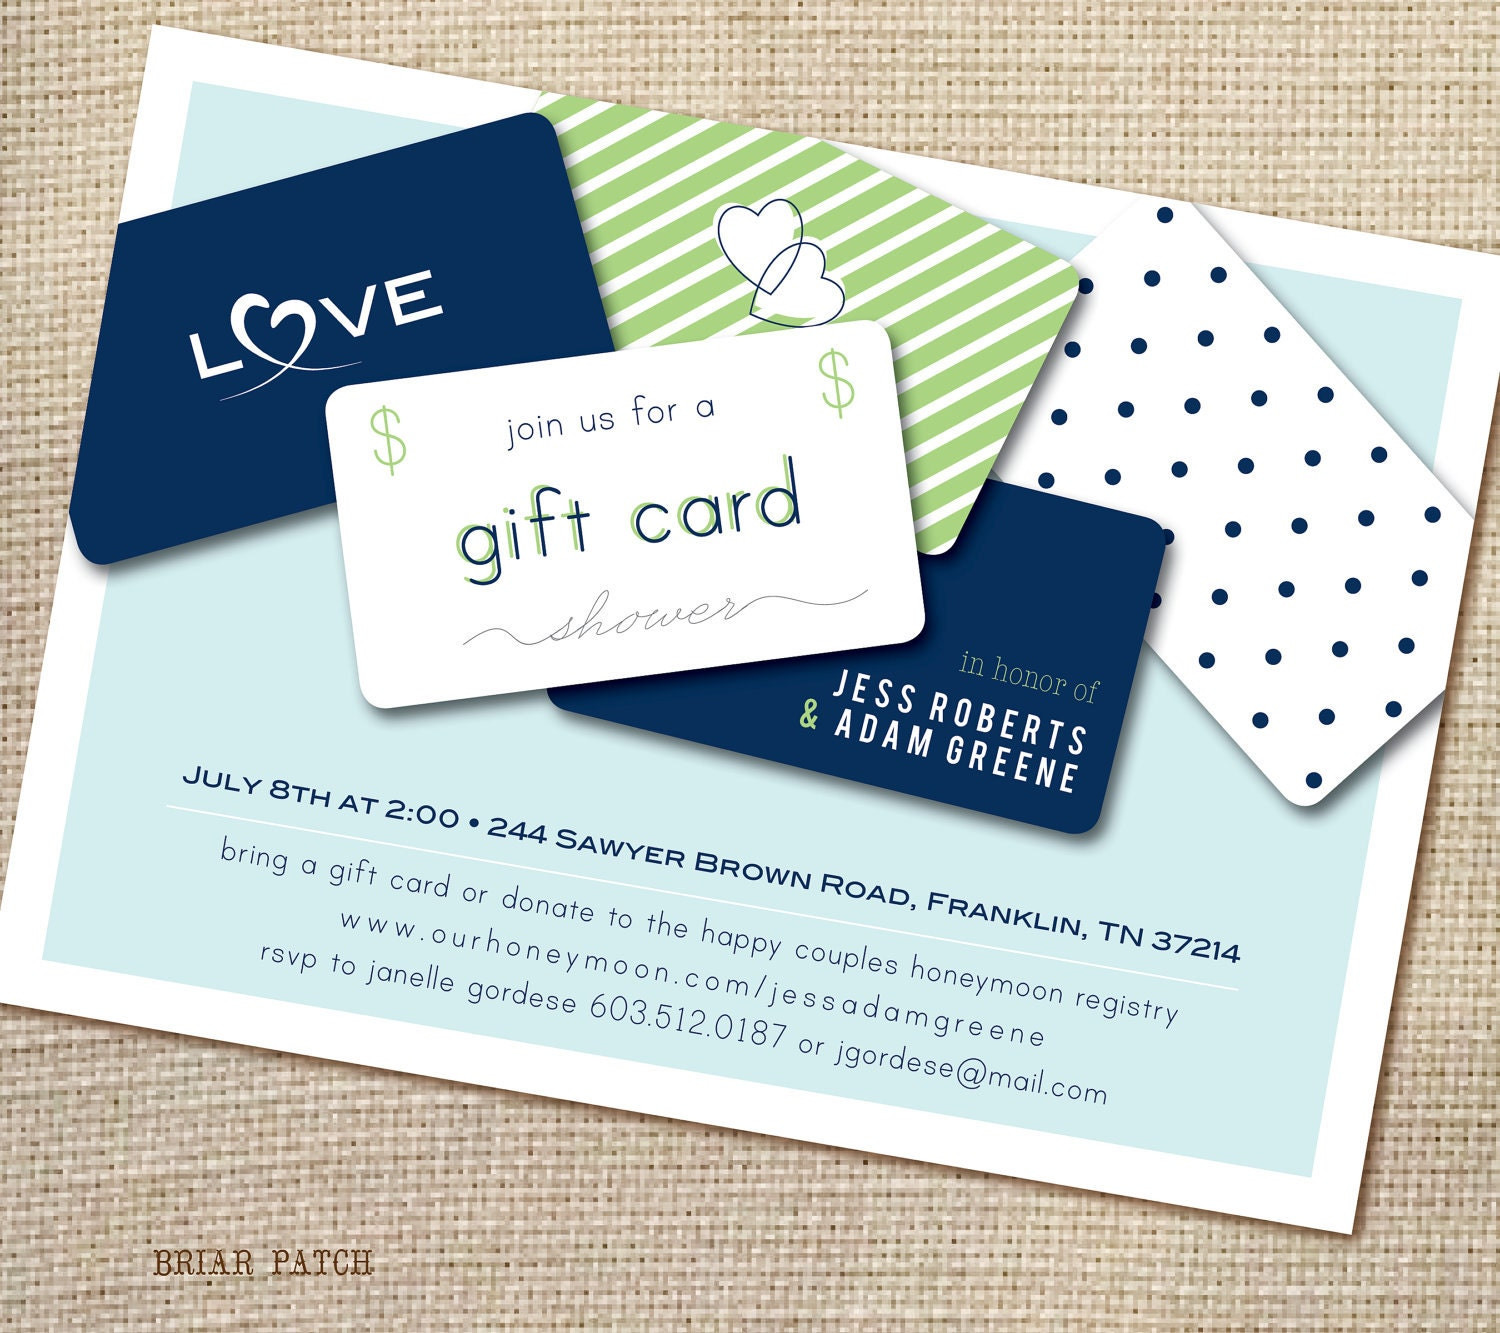 Gift Certificate Ideas For Couples
 The 20 Best Ideas for Gift Certificate Ideas for Couples